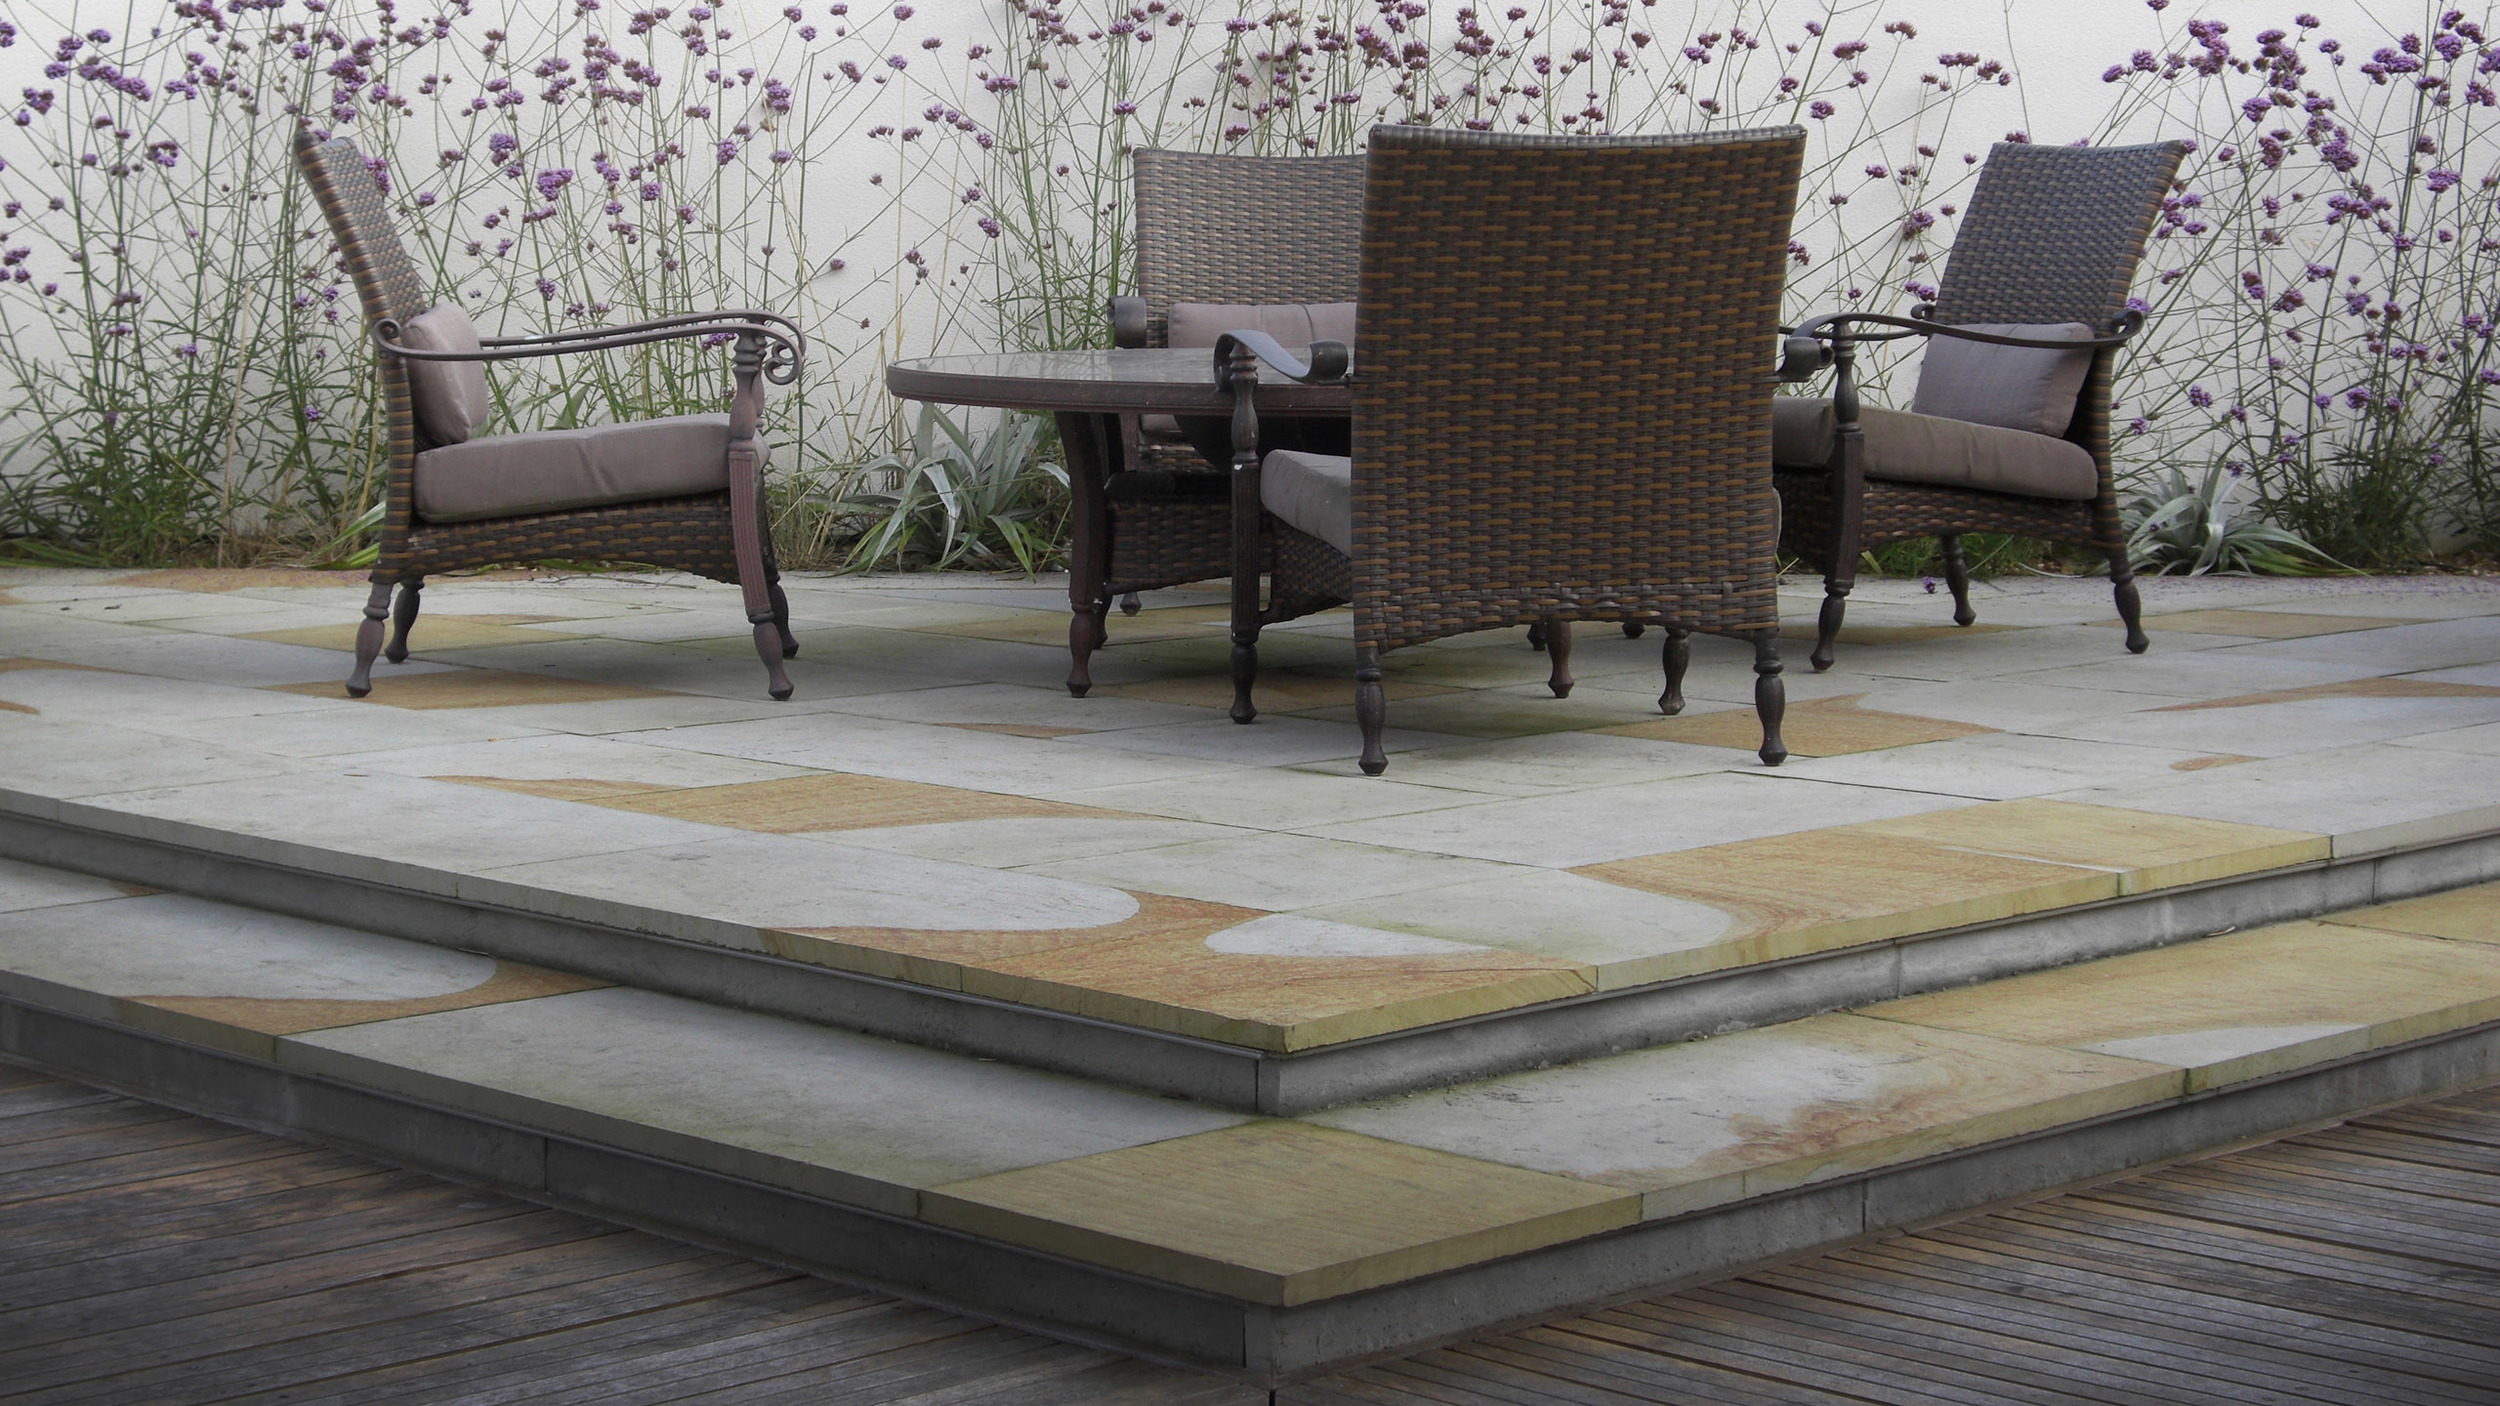 Outdoor relaxation area with sandstone paving